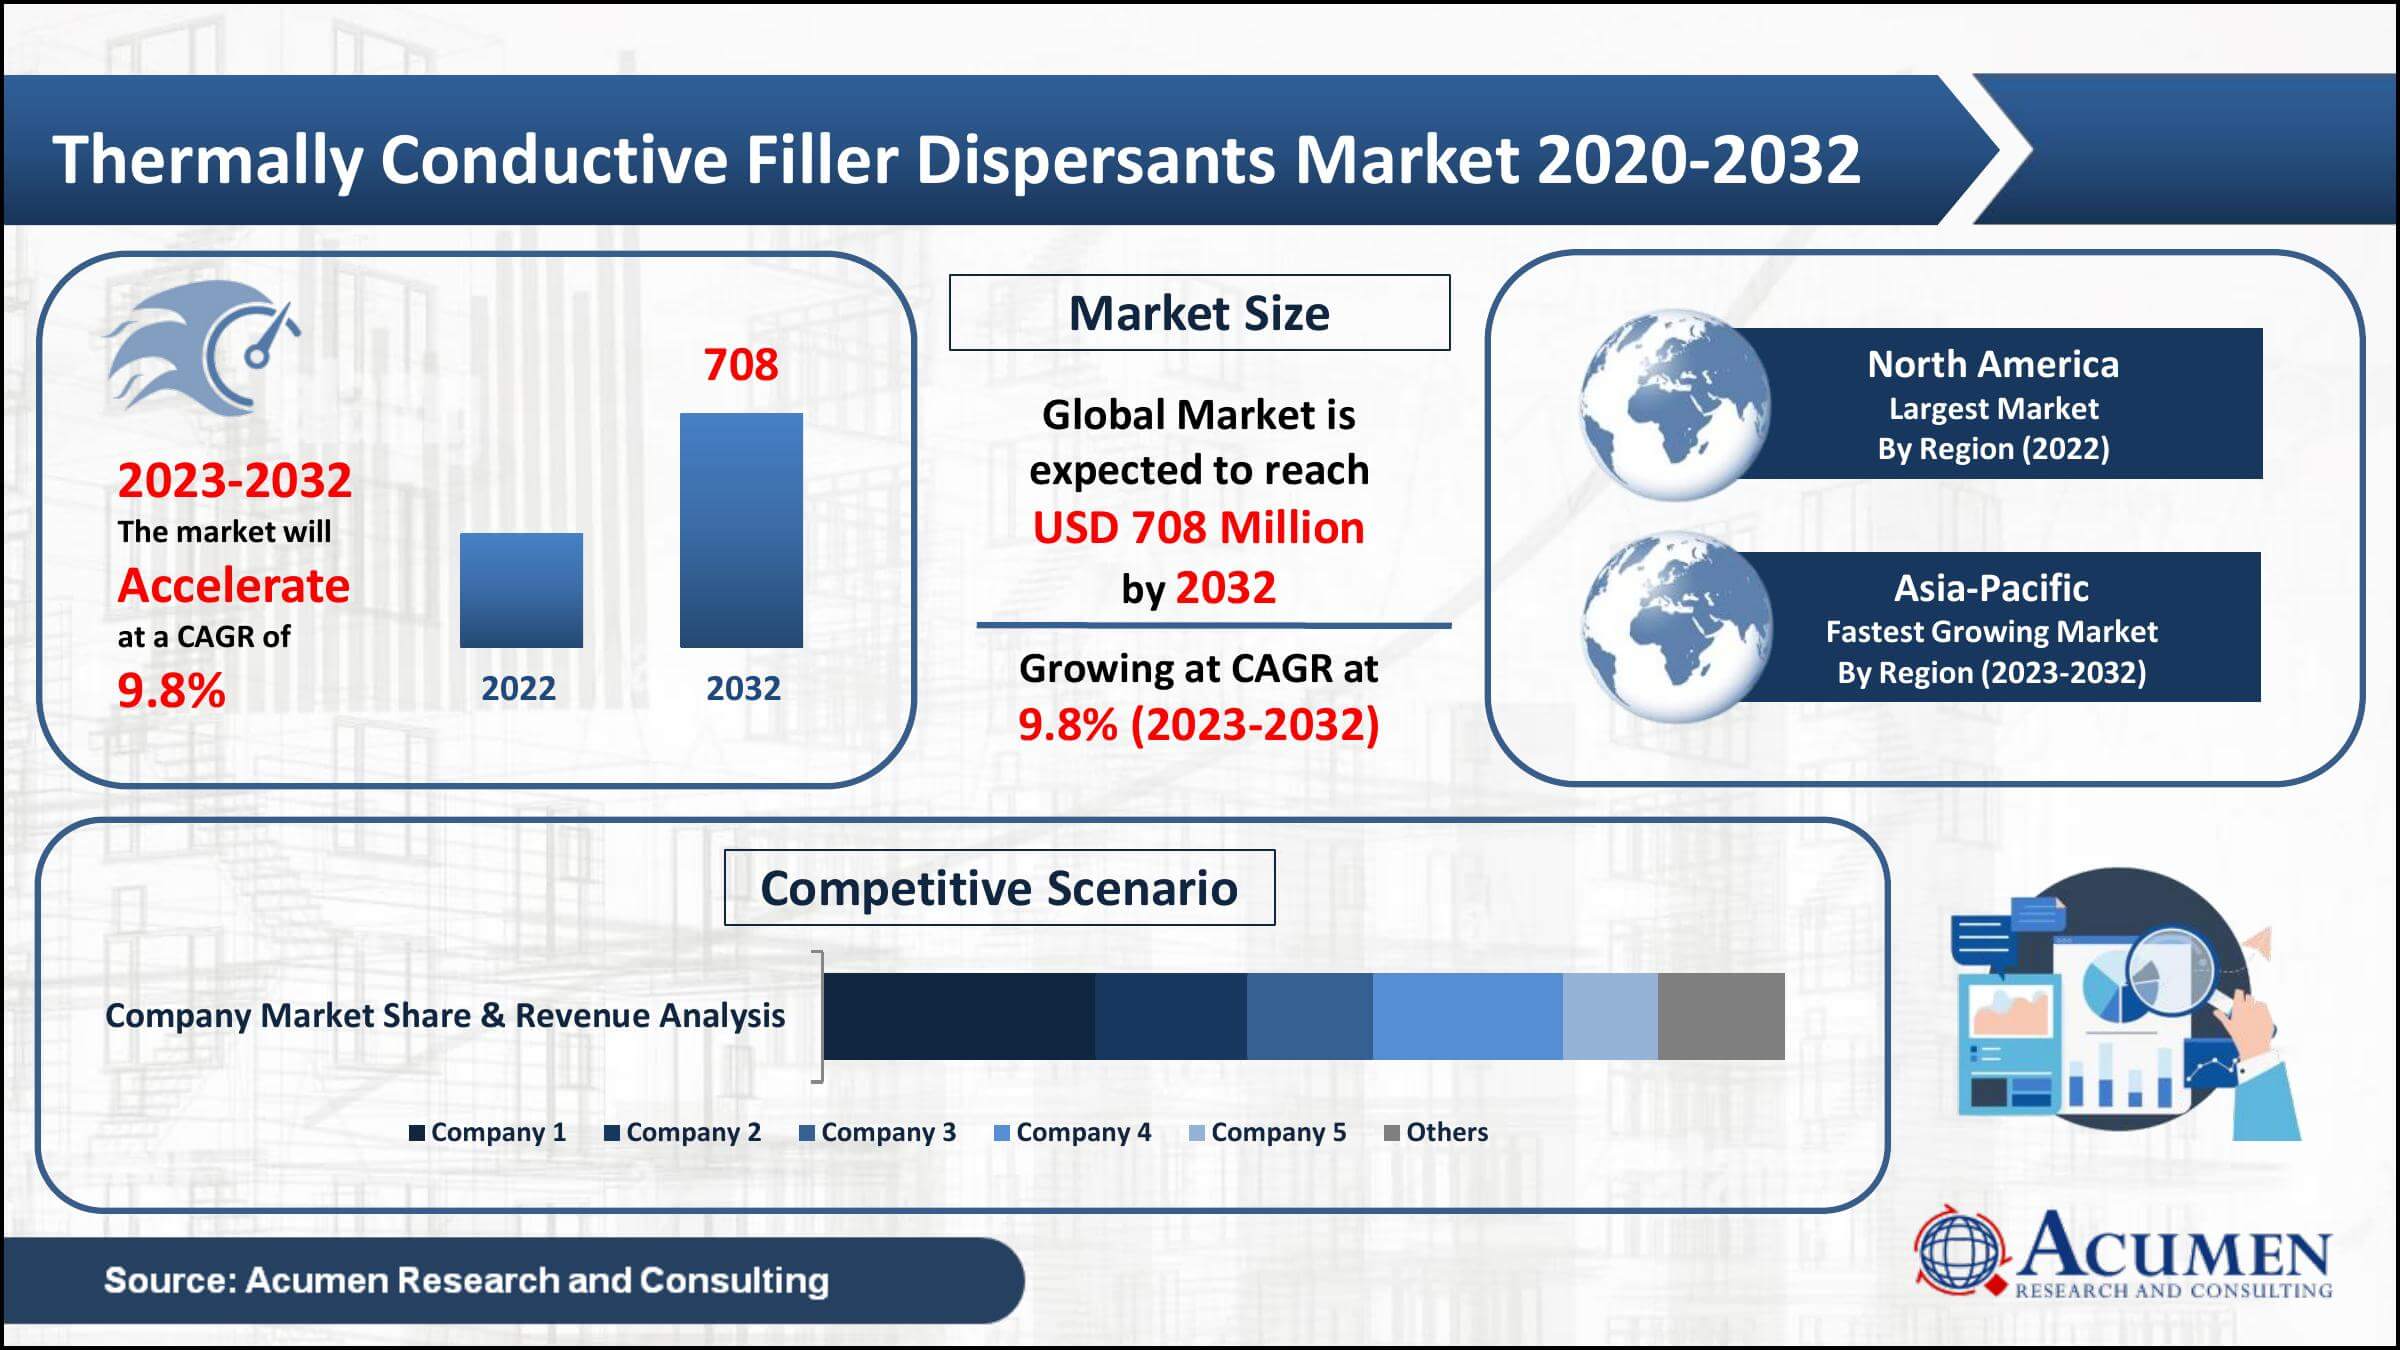 Thermally Conductive Filler Dispersants Market value